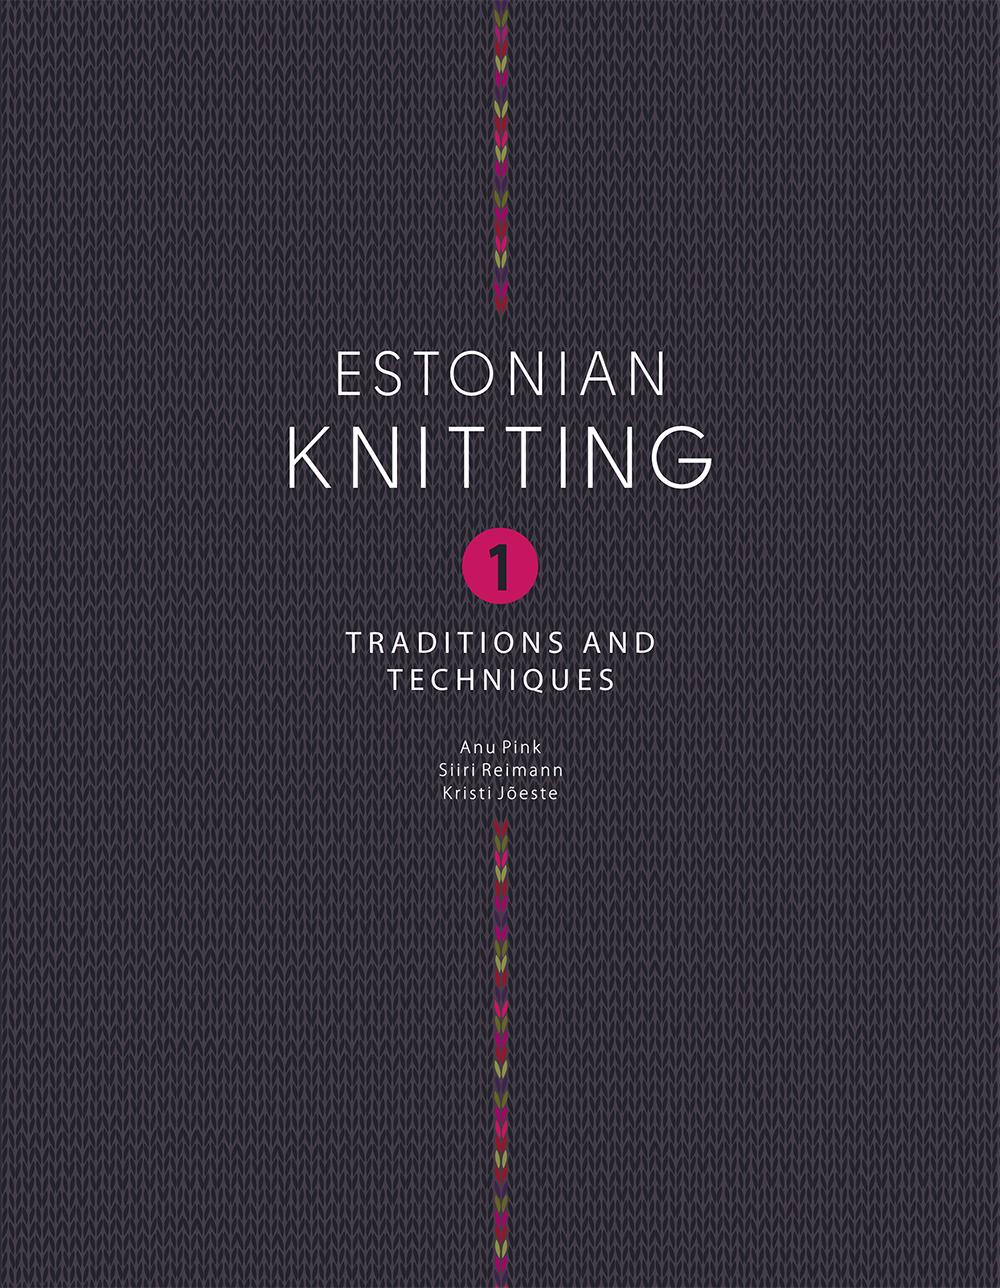 Estonian Knitting 1.Traditions and Techniques